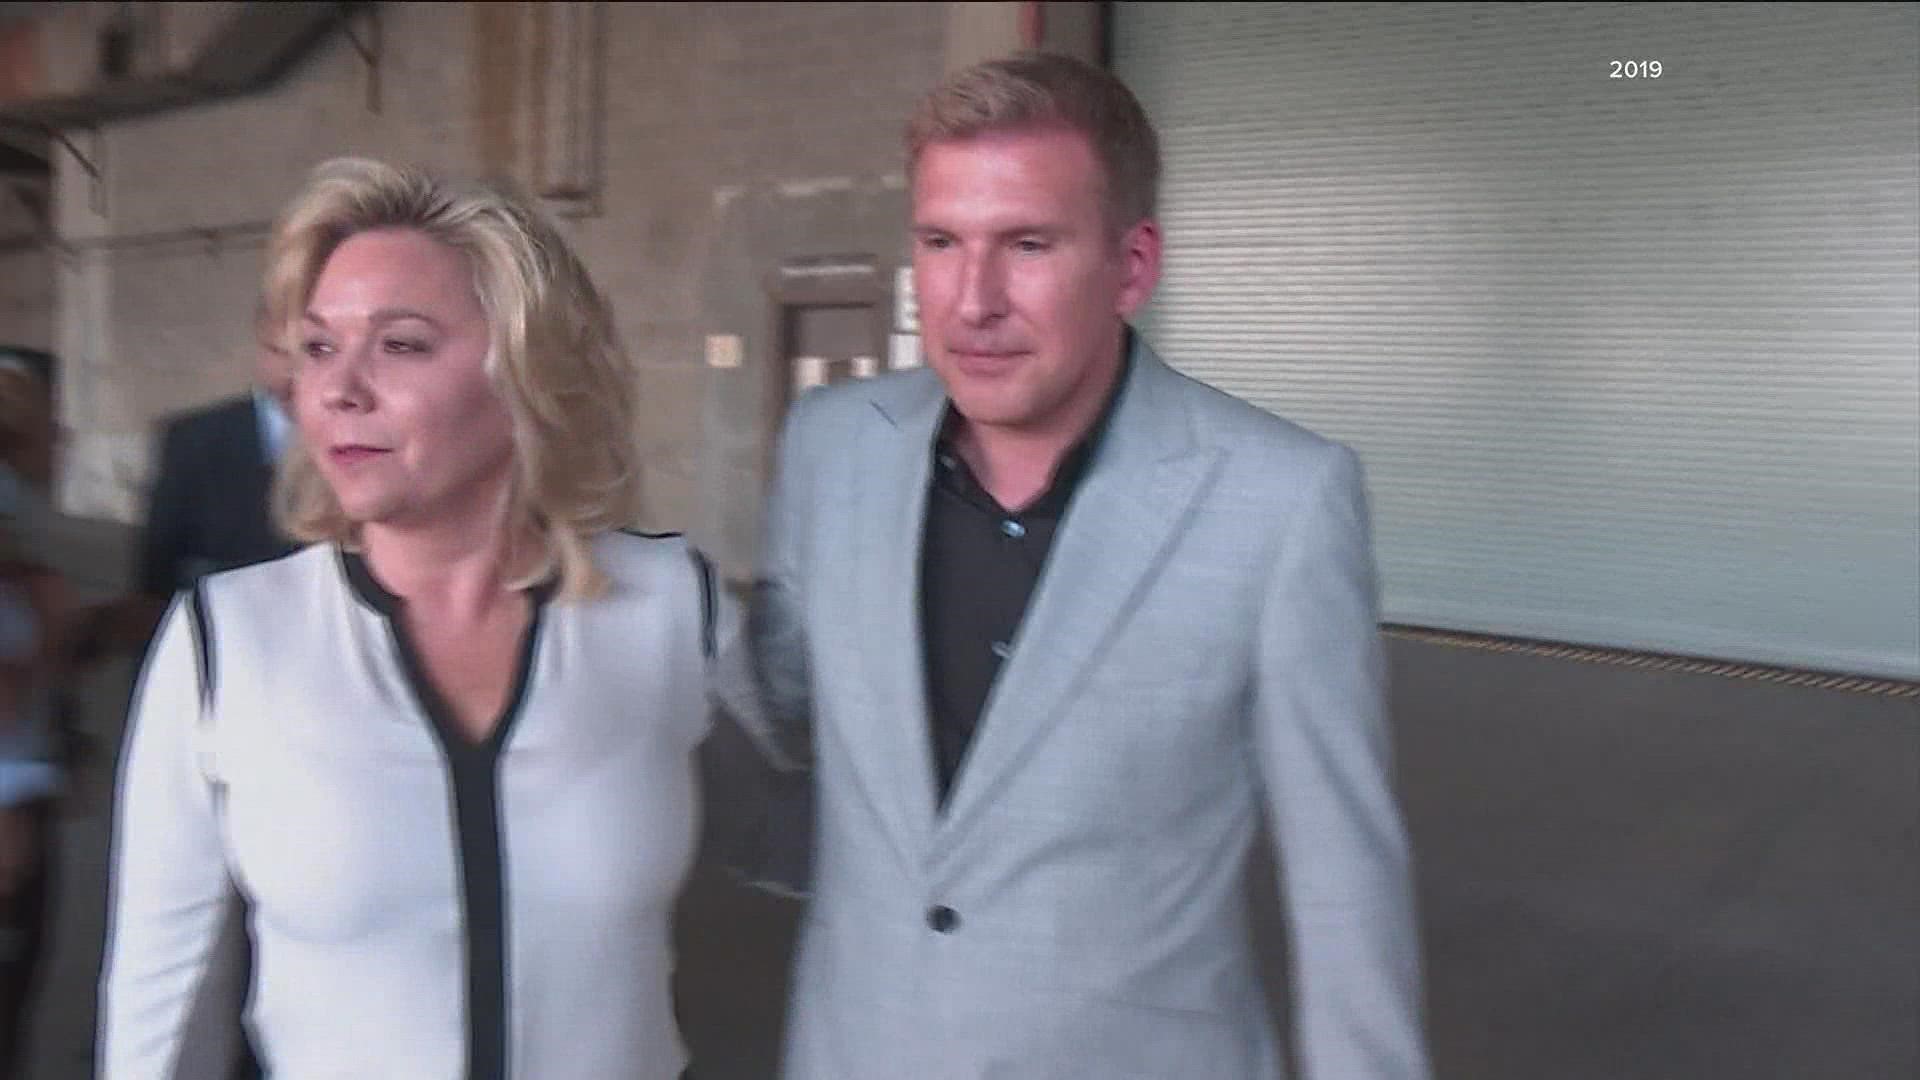 The Chrisleys gained fame with their show “Chrisley Knows Best,” which follows their tight-knit, boisterous family.